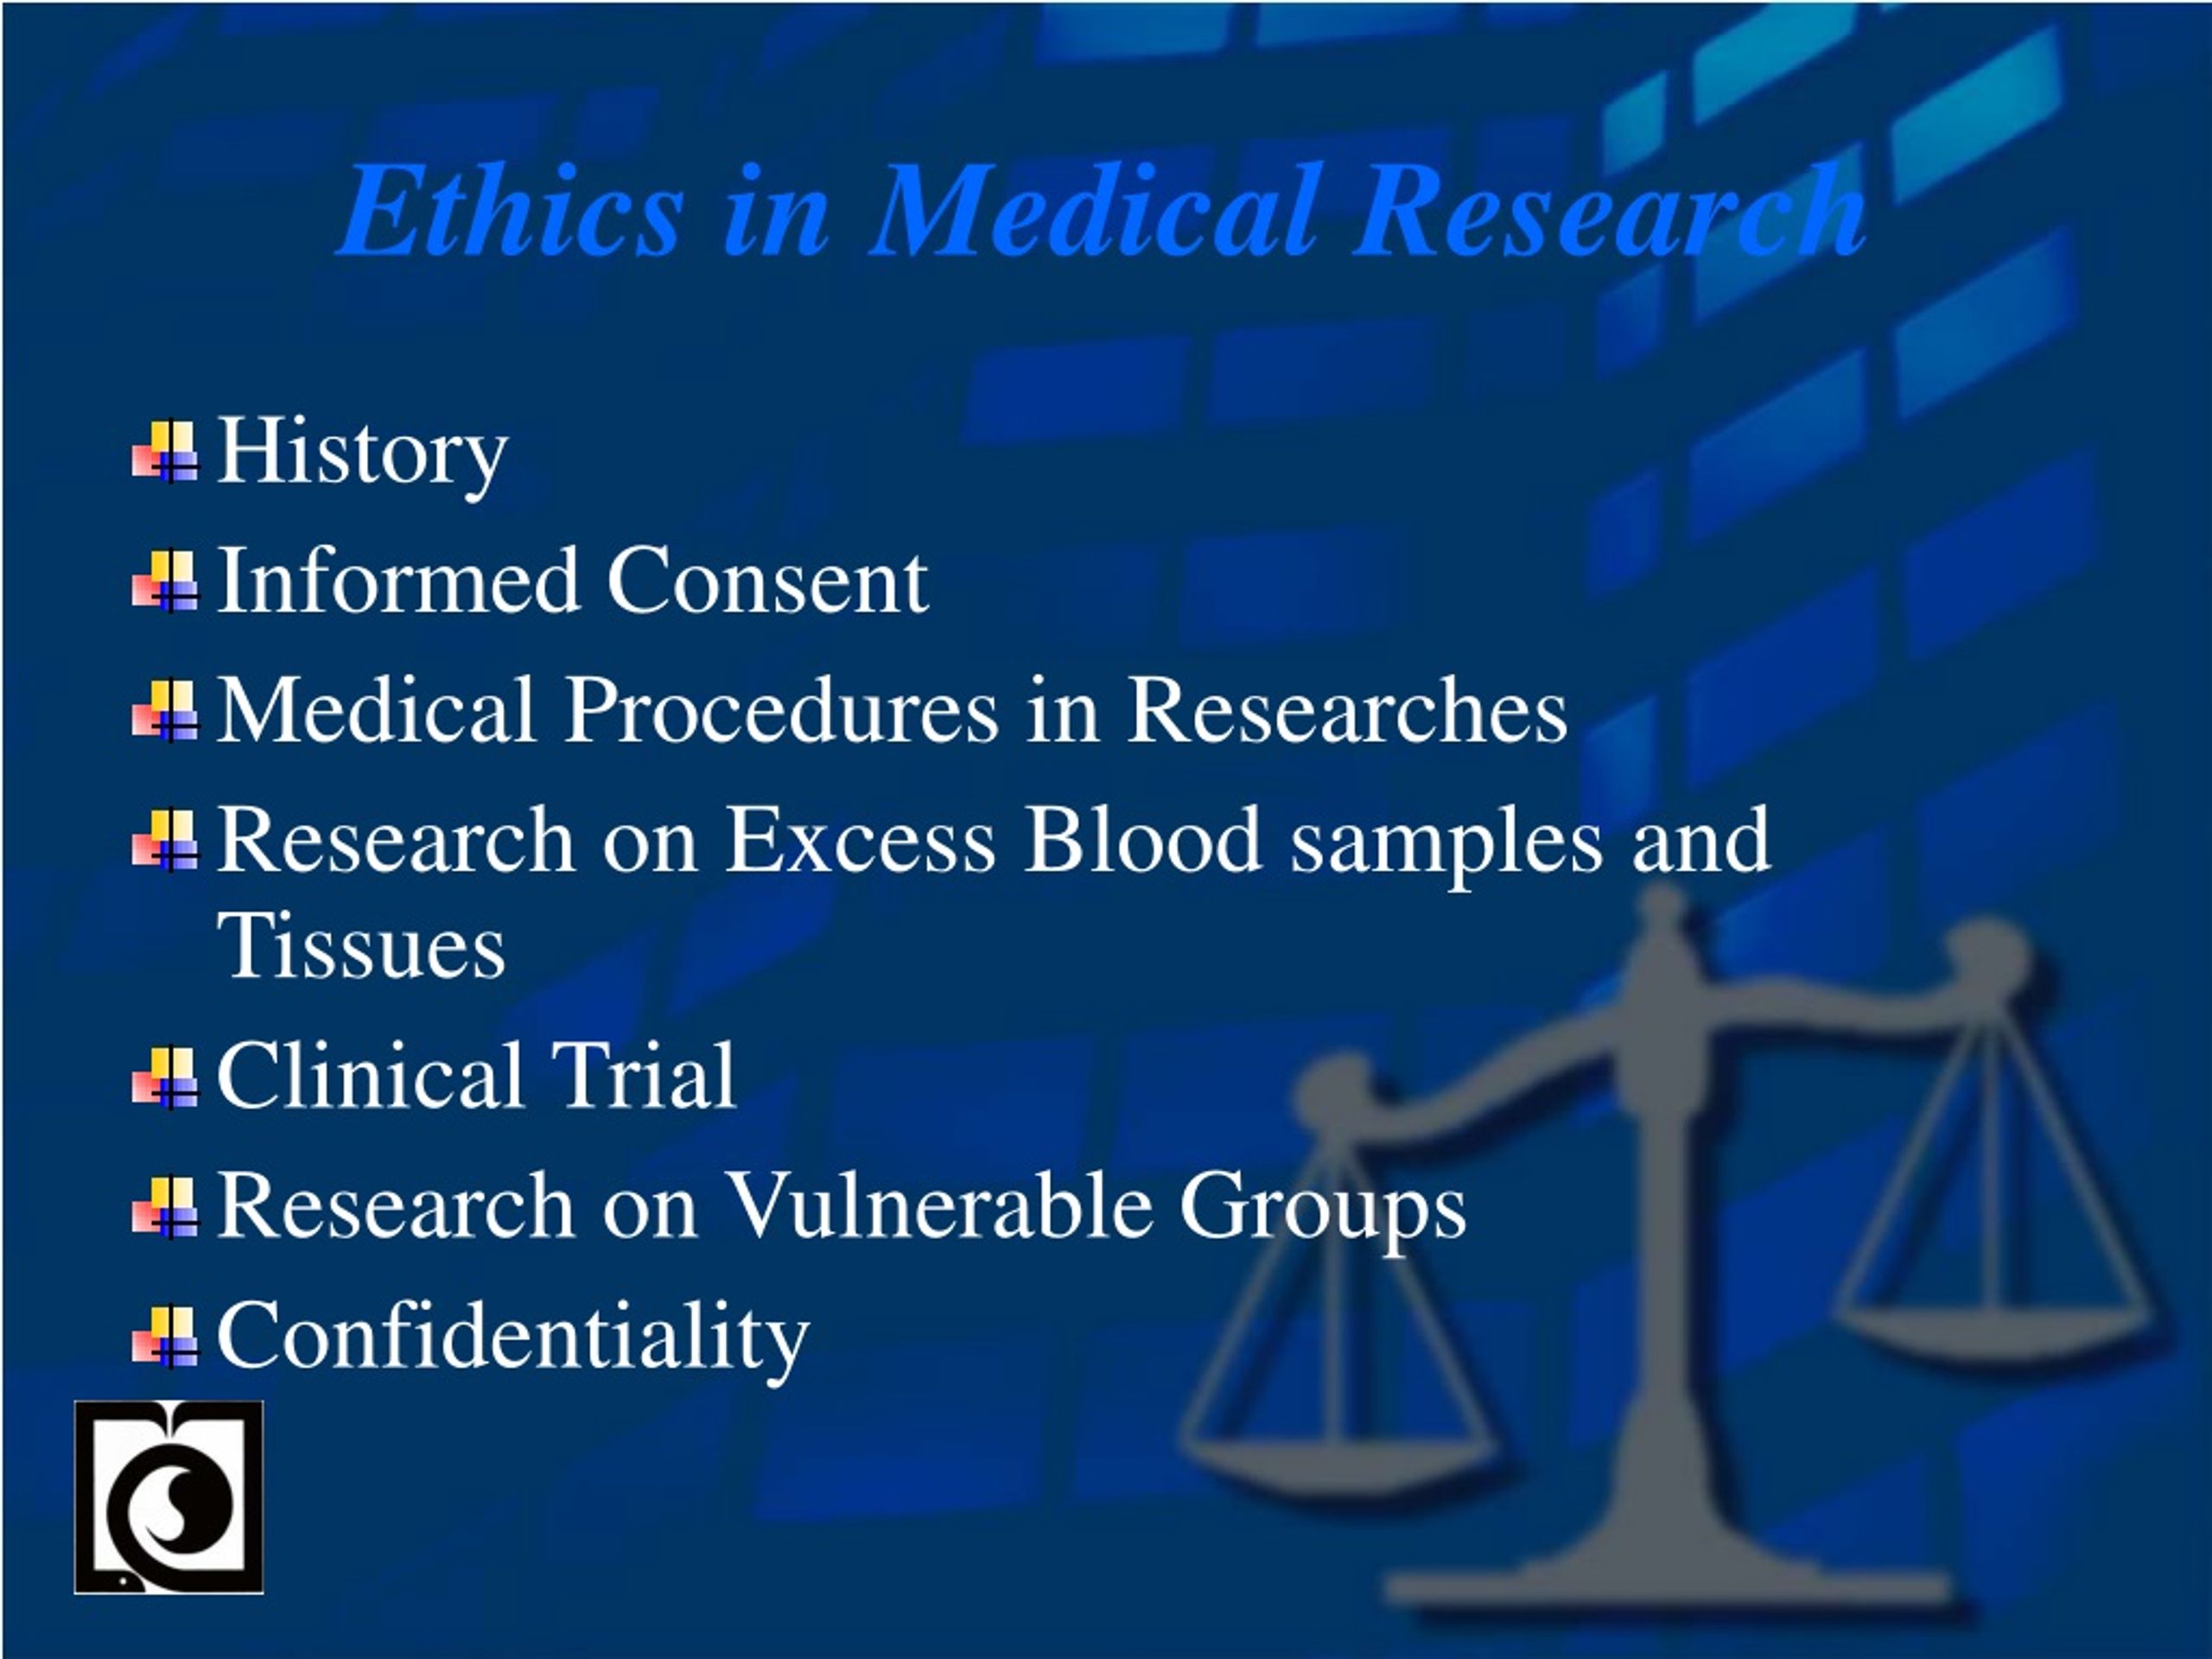 medical research history values in medical ethics